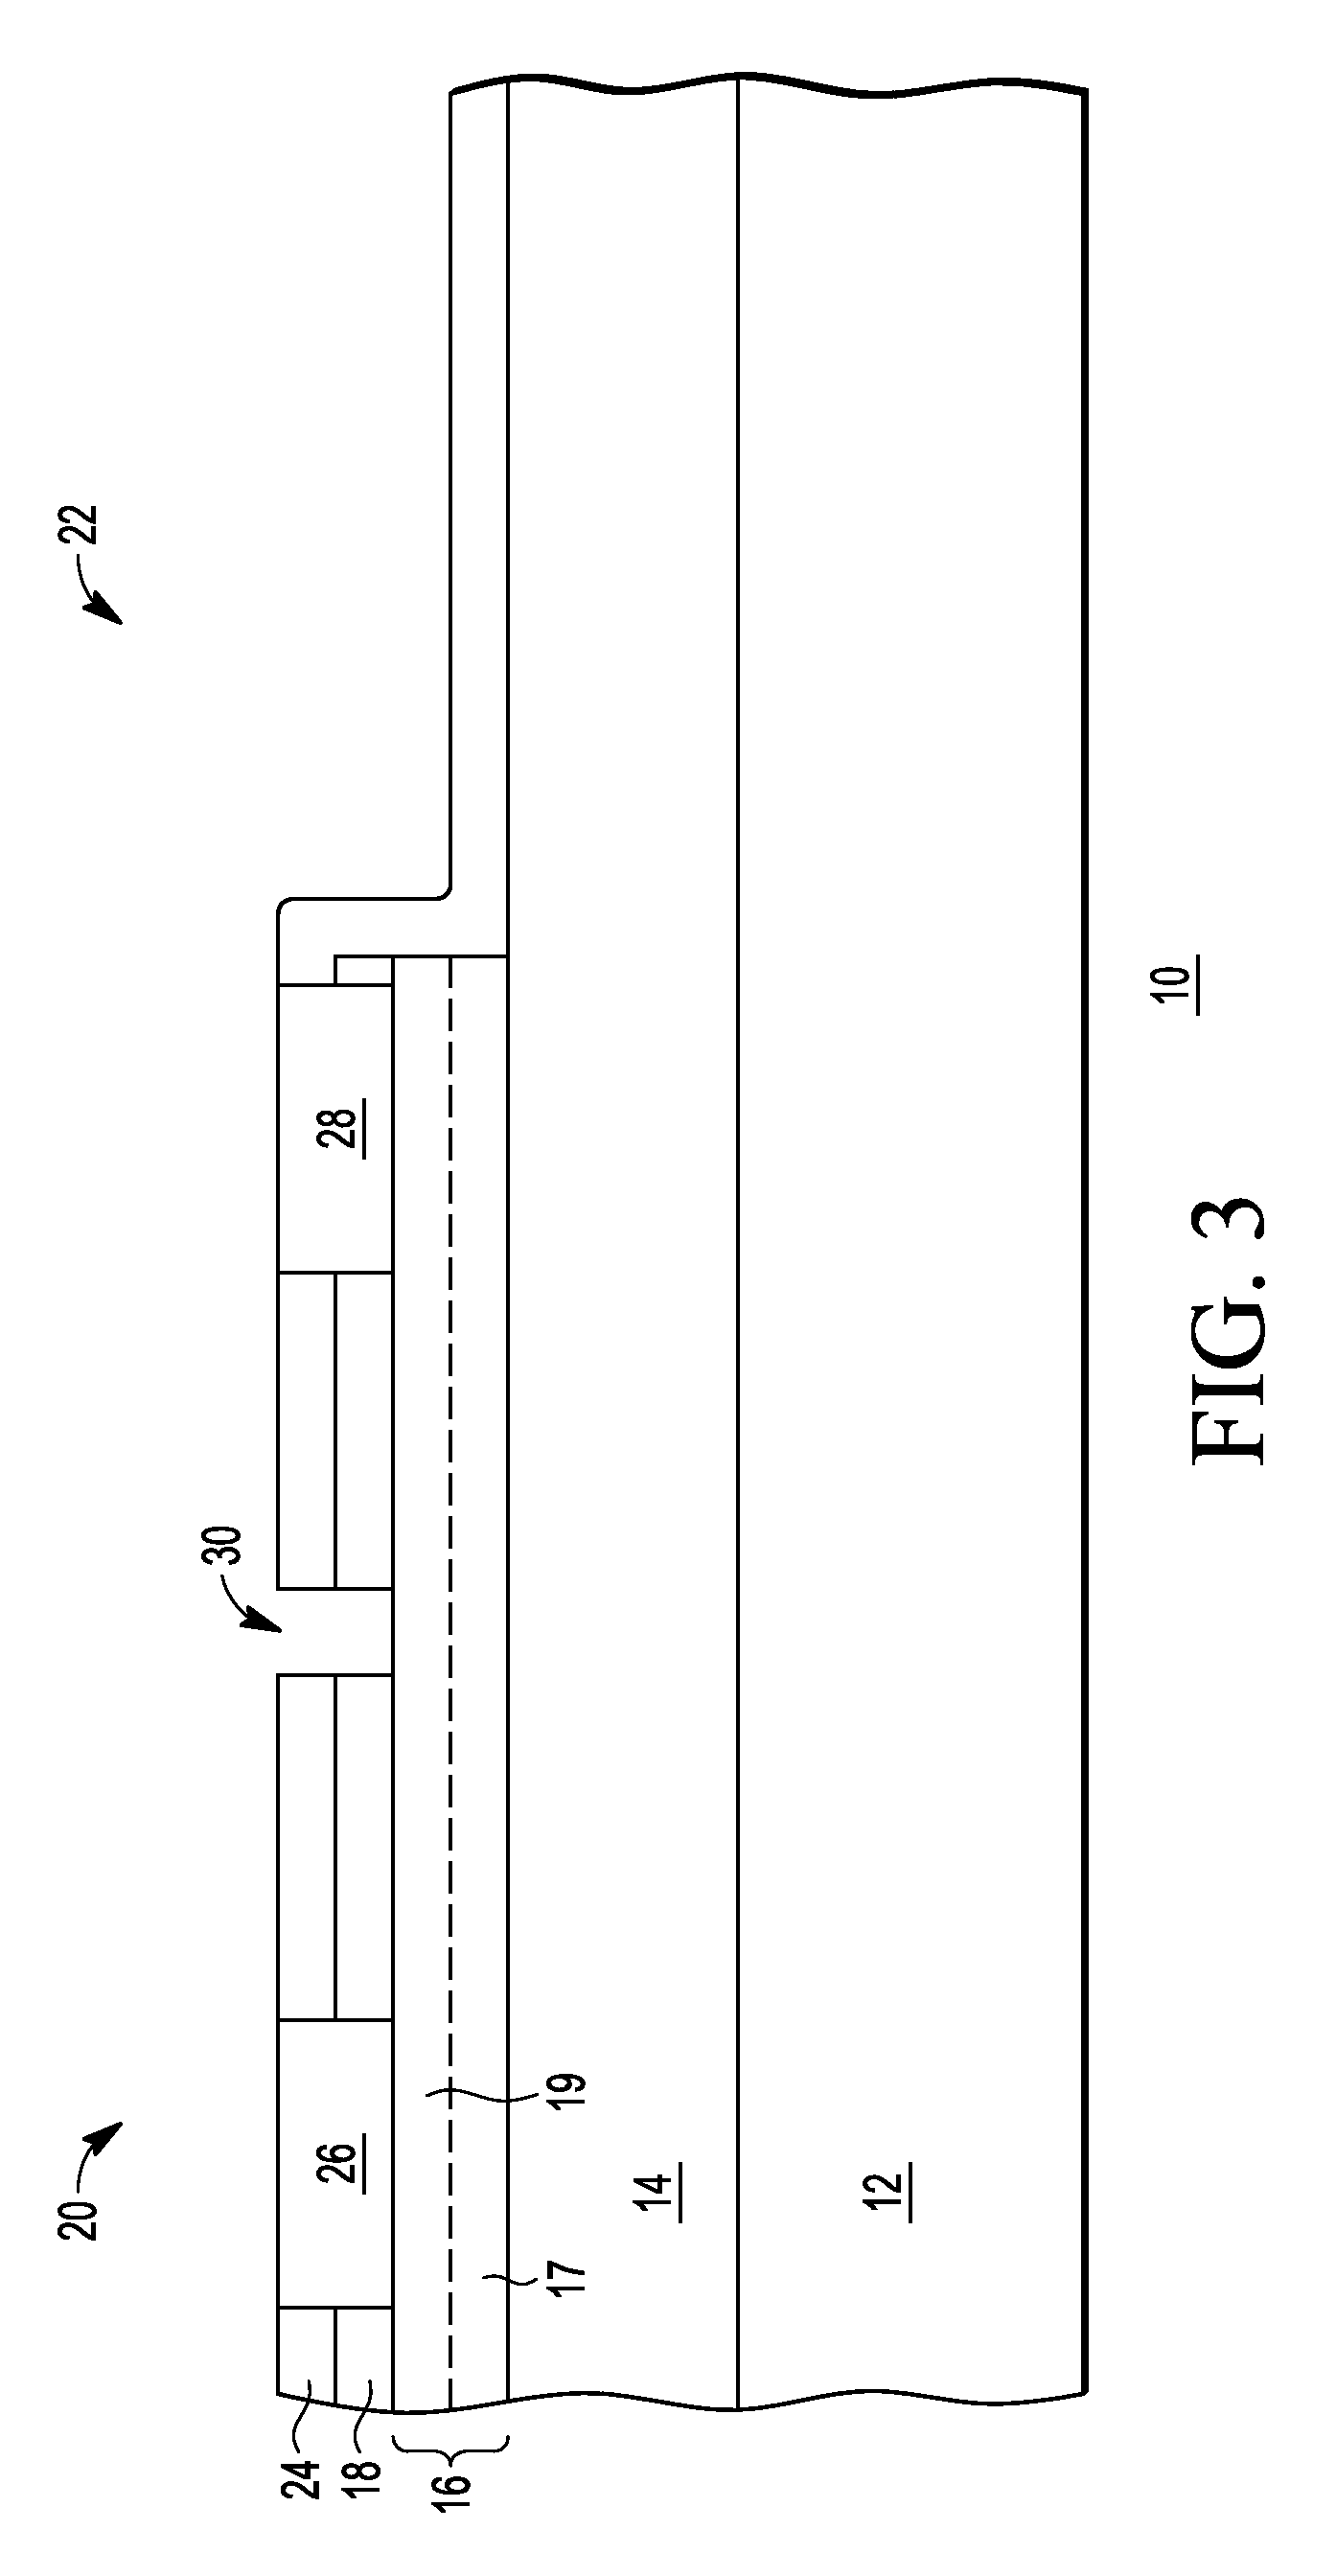 Integrated circuit having a bulk acoustic wave device and a transistor